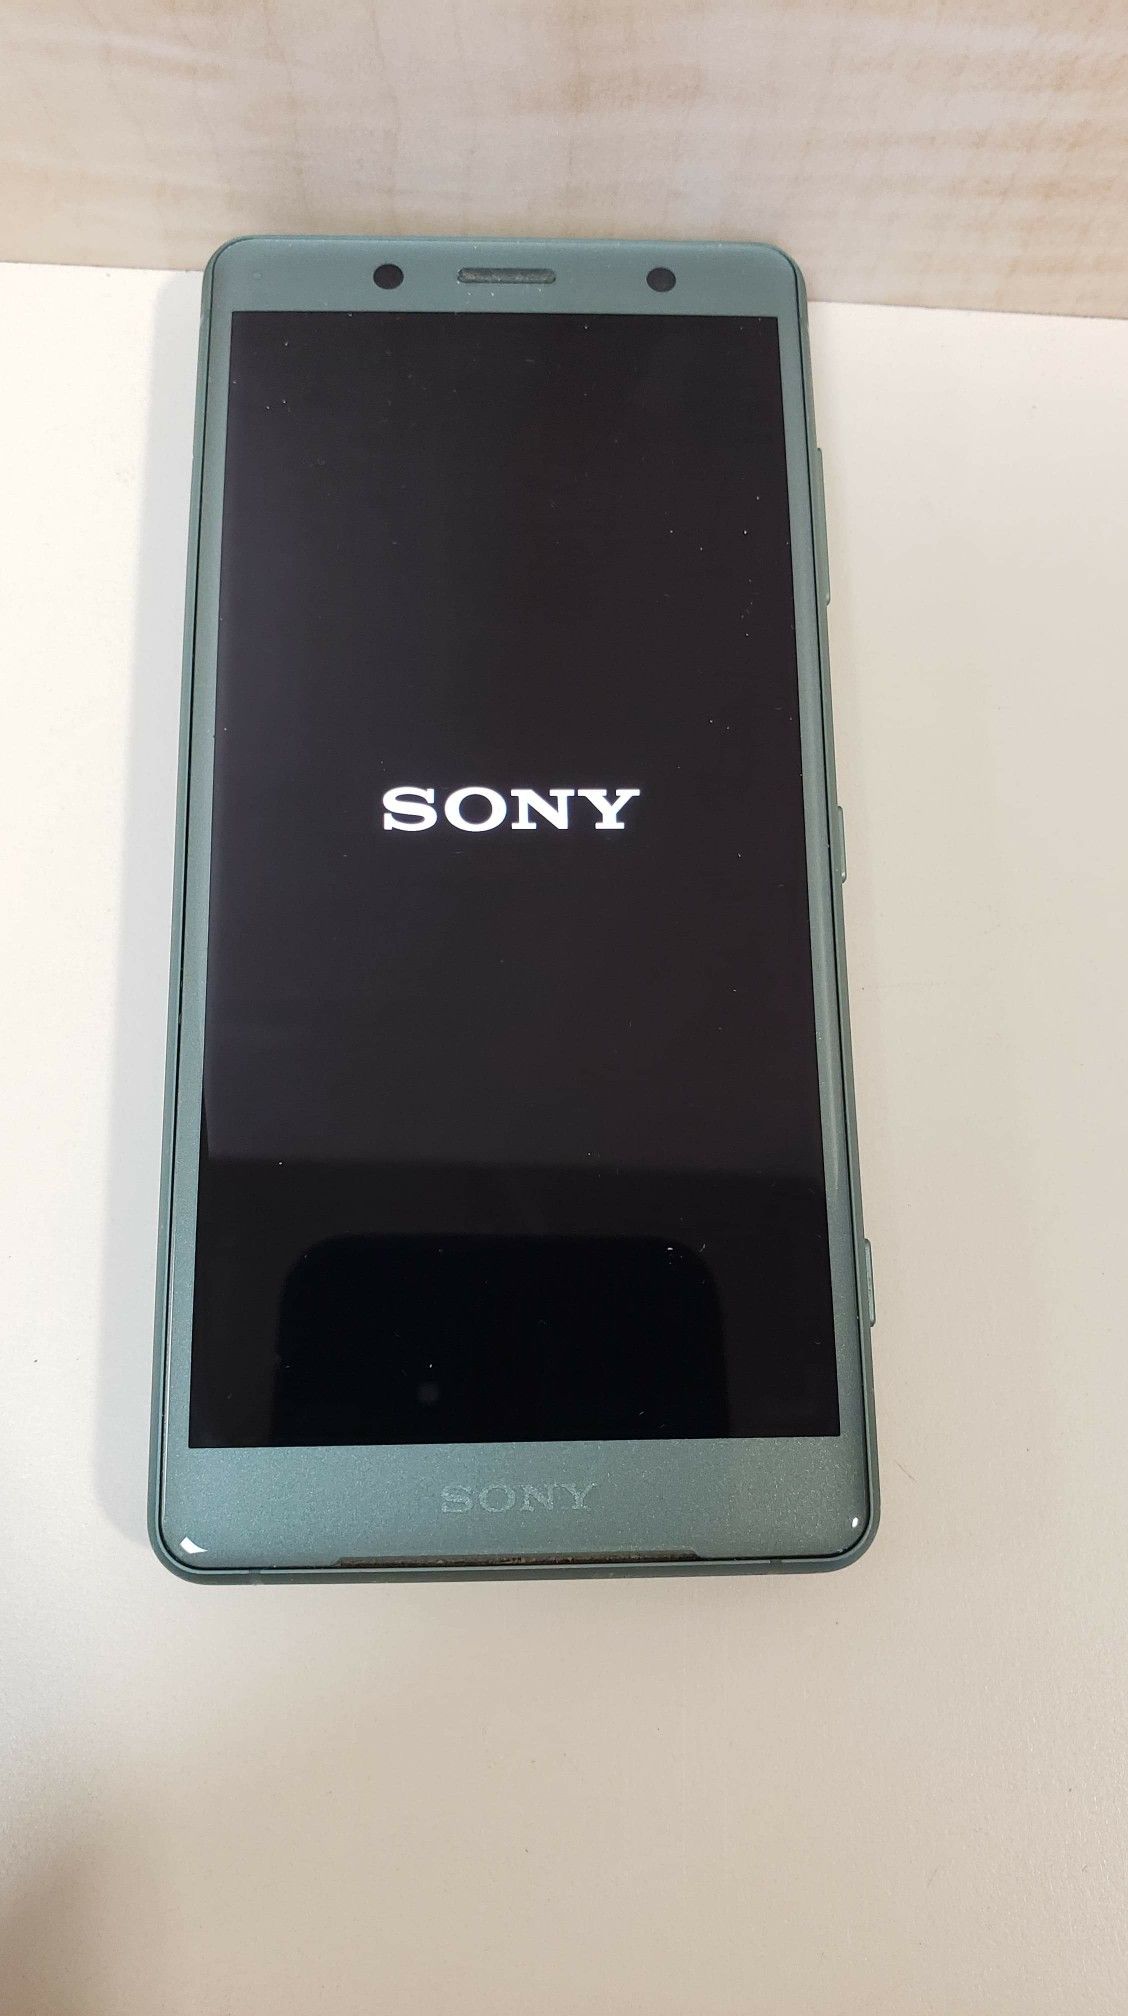 sony xperia xz2 compact 64gb factory unlocked for any cell carrier works in usa Mexico and overseas